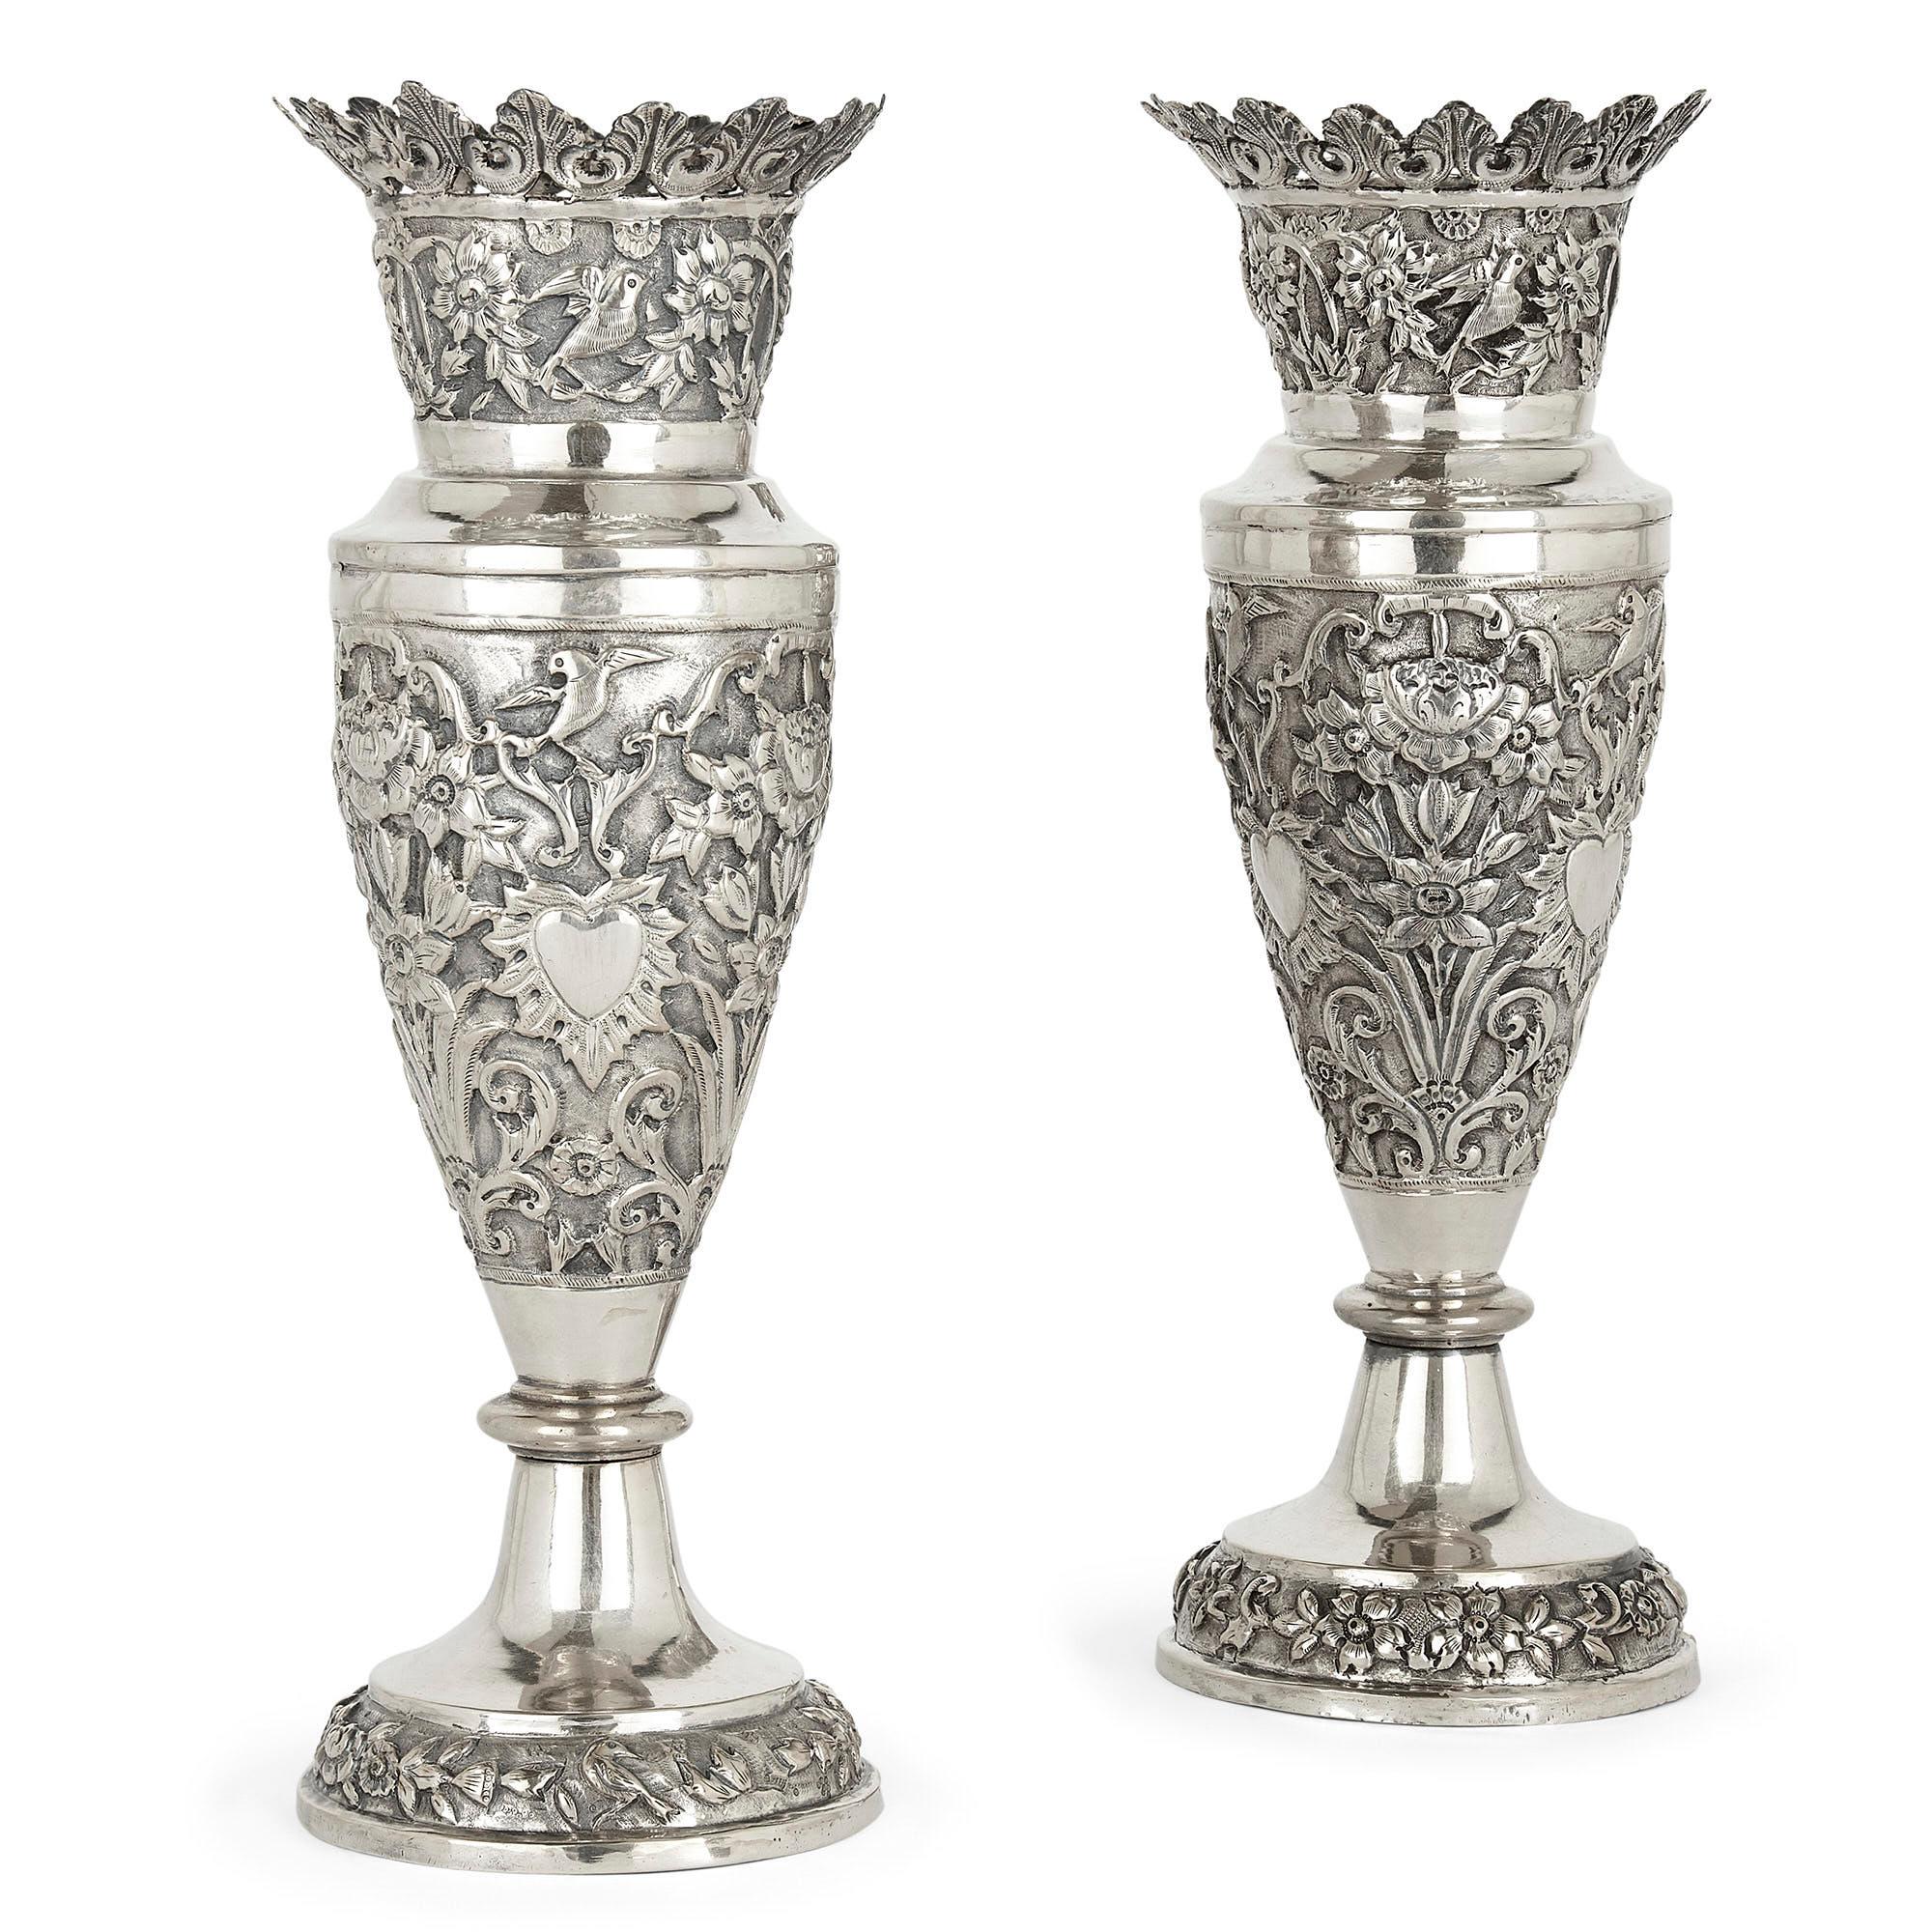 Pair of floral silver vases produced in Qajar Persia
Persian, late 19th century
Measures: Height 27cm, diameter 9.5cm

These fine Persian silver vases are adorned with repoussé and chased motifs. Each vase features a circular foot adorned with